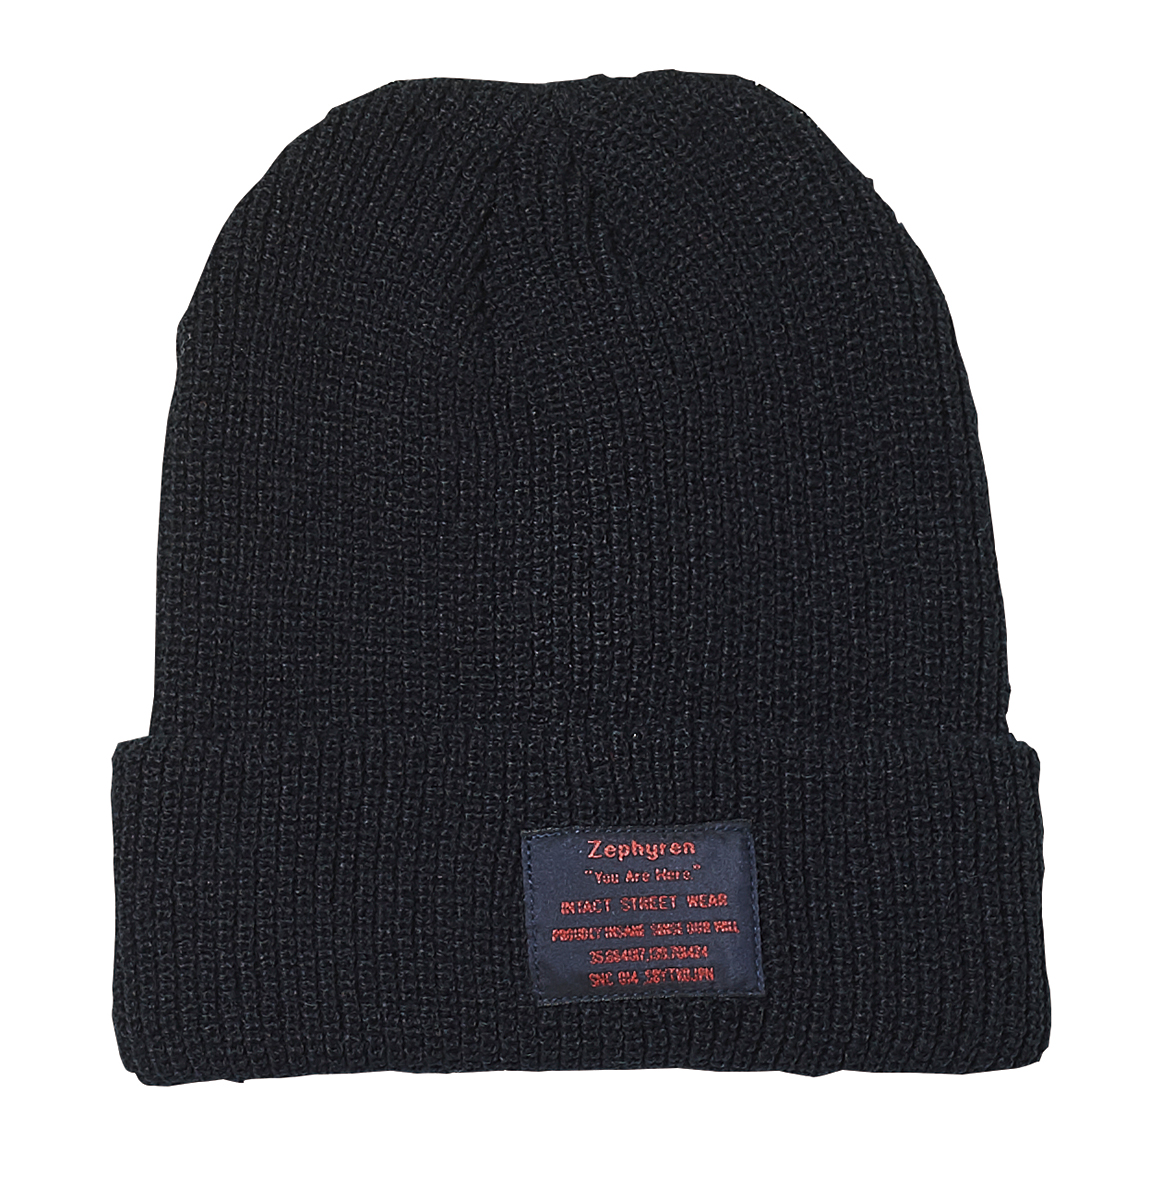 KNIT Beanie -You Are Here BLACK